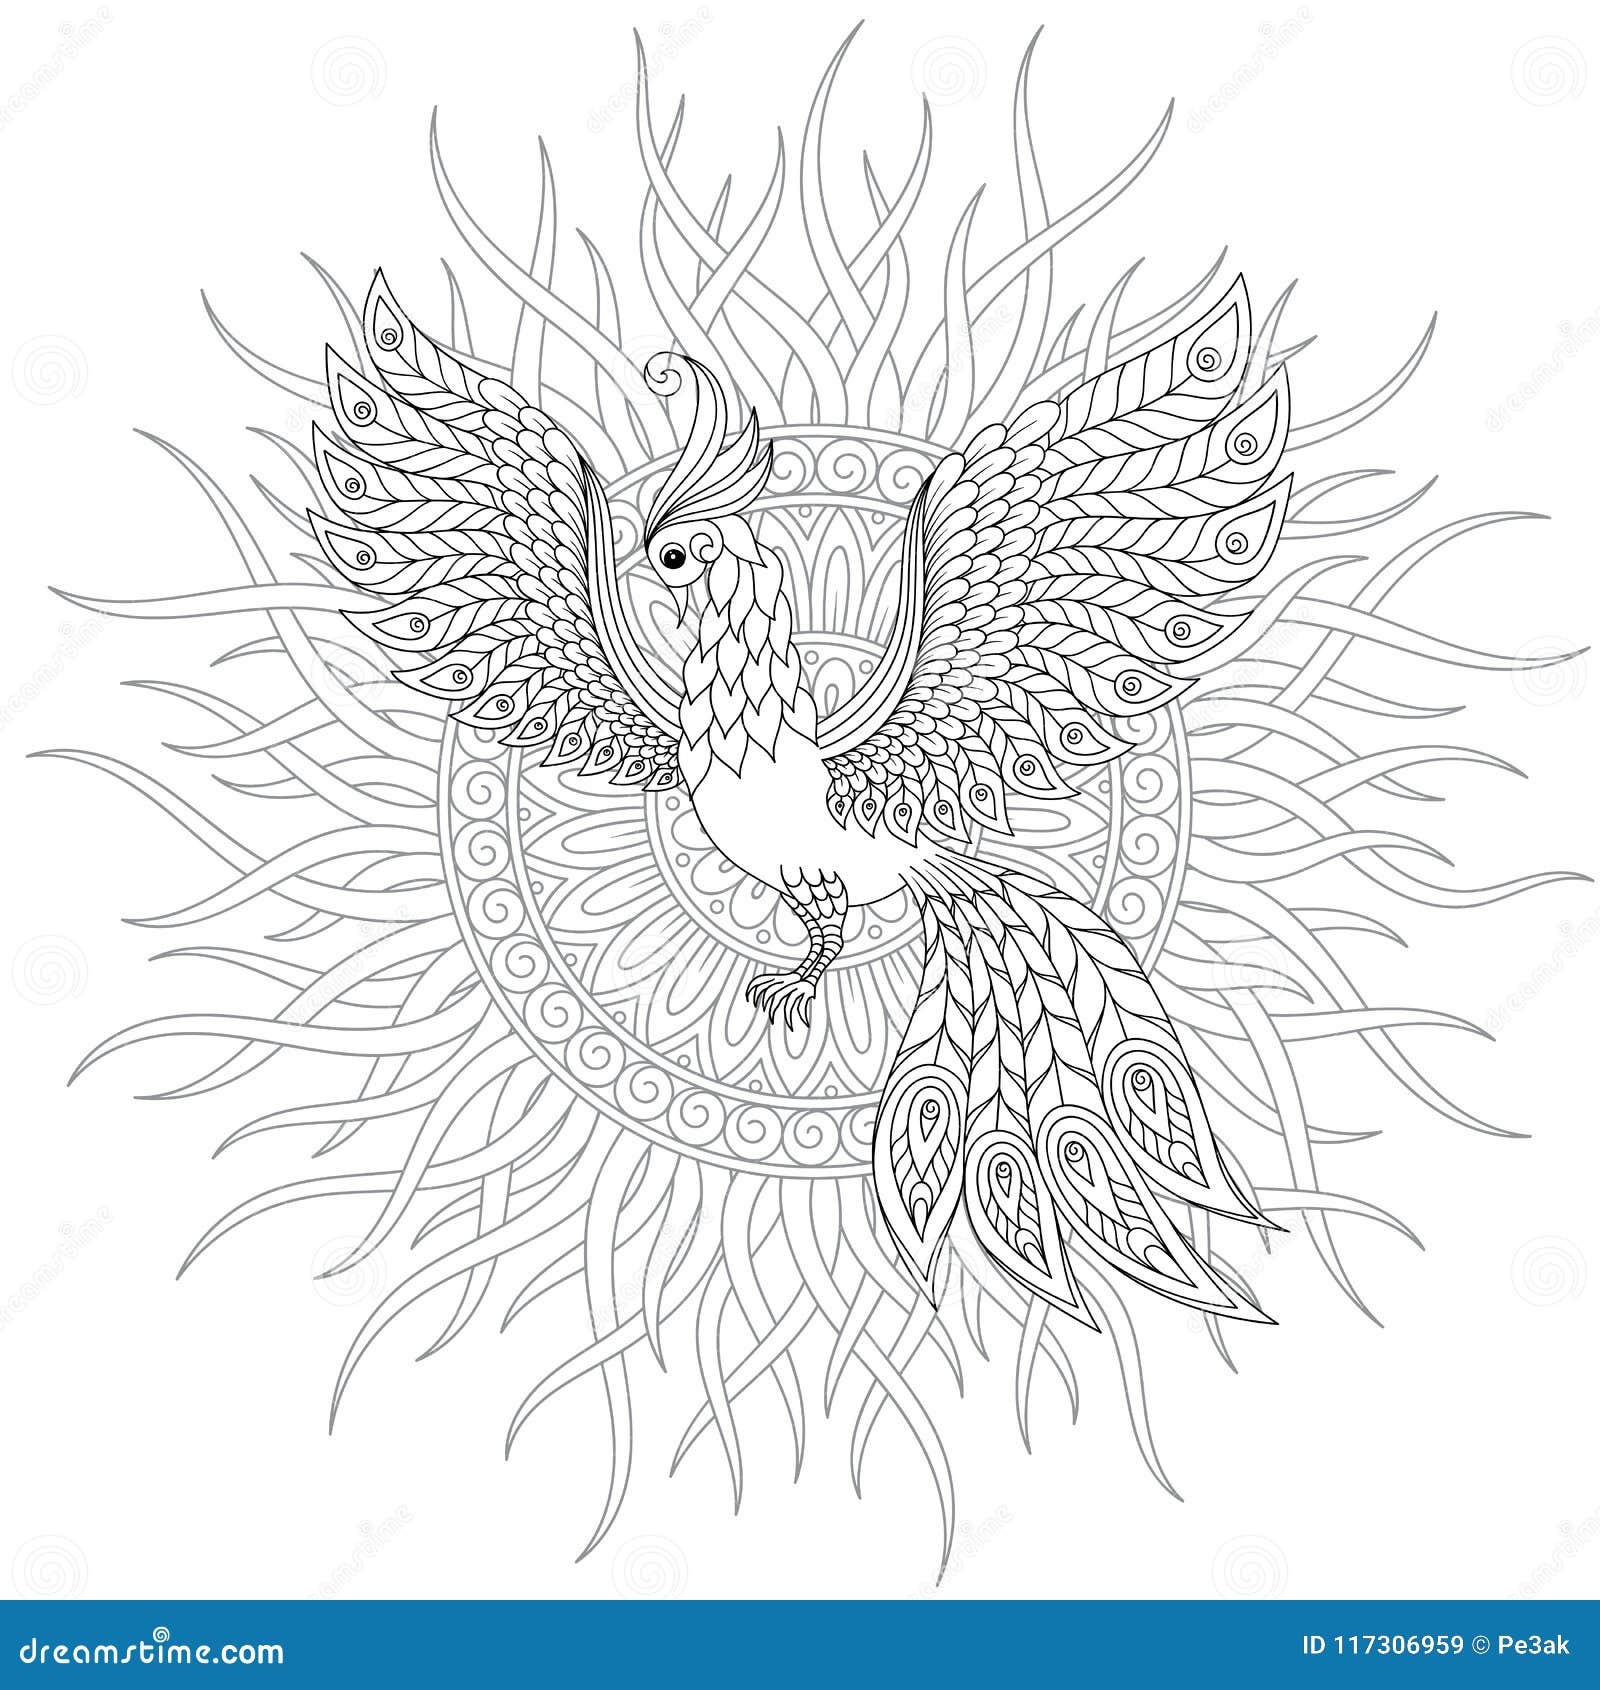 Download Firebird For Anti Stress Coloring Page With High Details ...